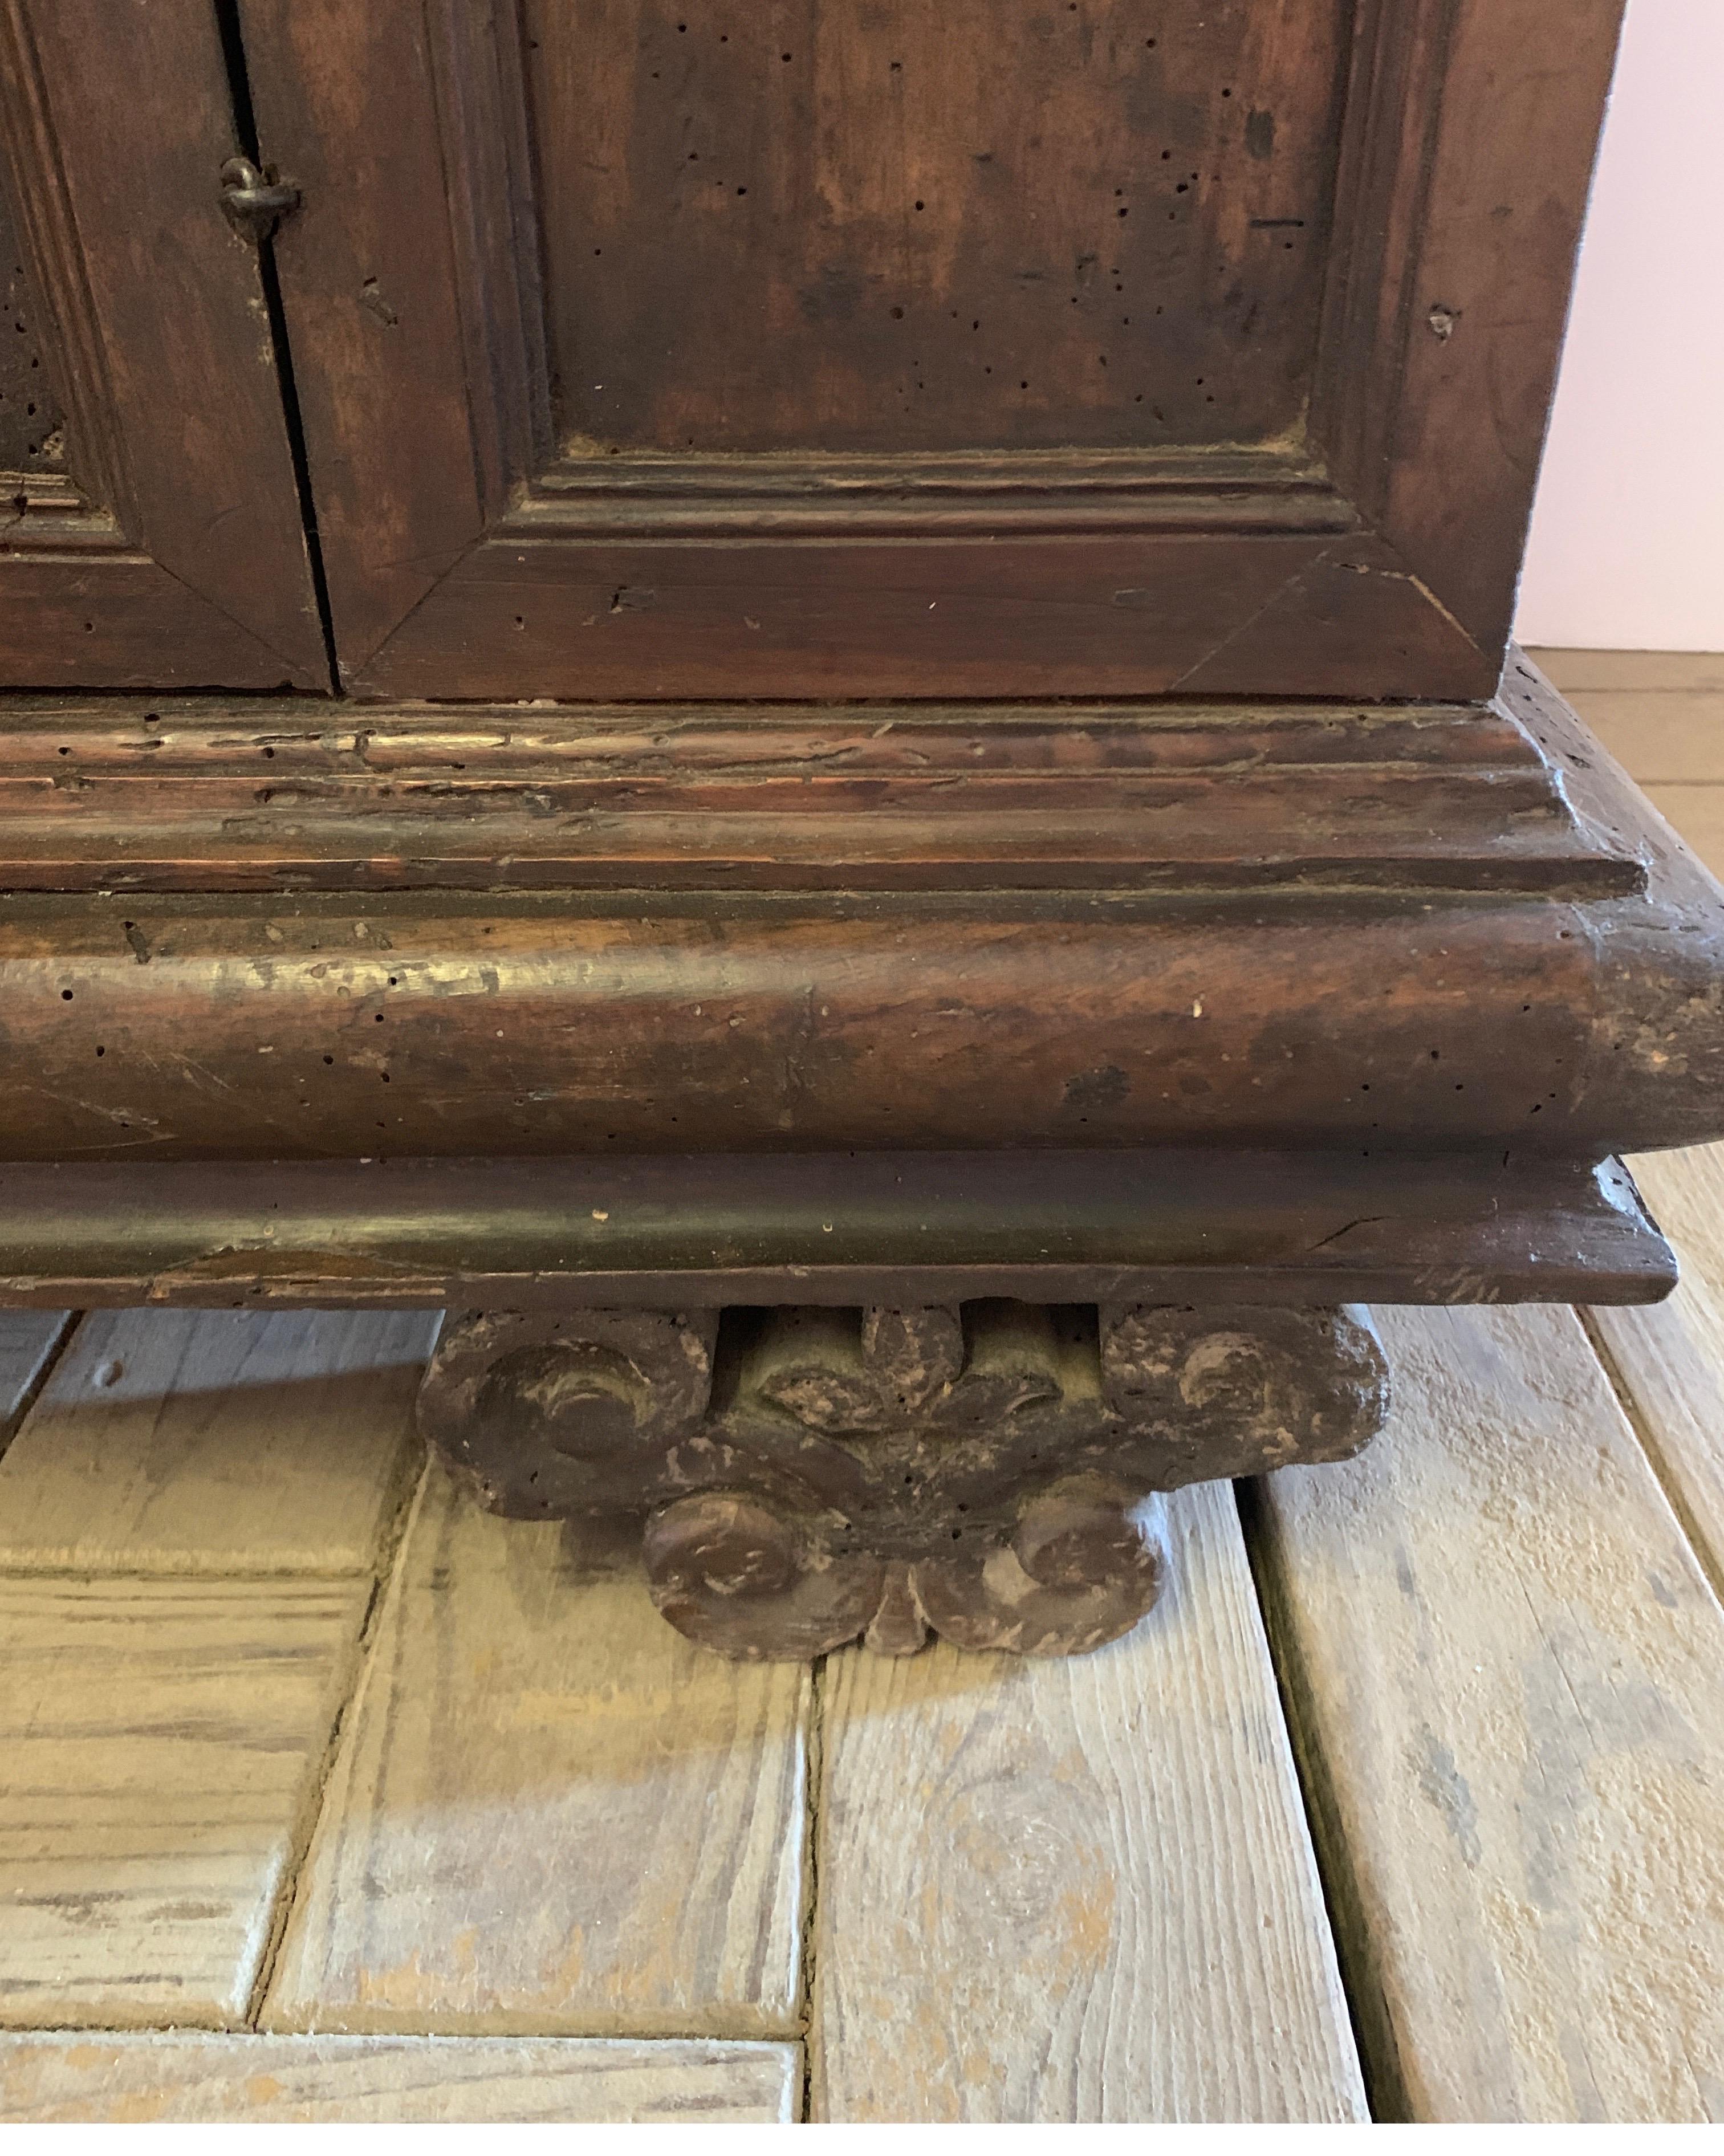 Early Tuscan buffet with three doors, middle shelf for lots of storage. It has beautifully carved feet but otherwise simple and modern shape in walnut wood. It has 3 key for the locks as well. Prior bug holes shown in photos.